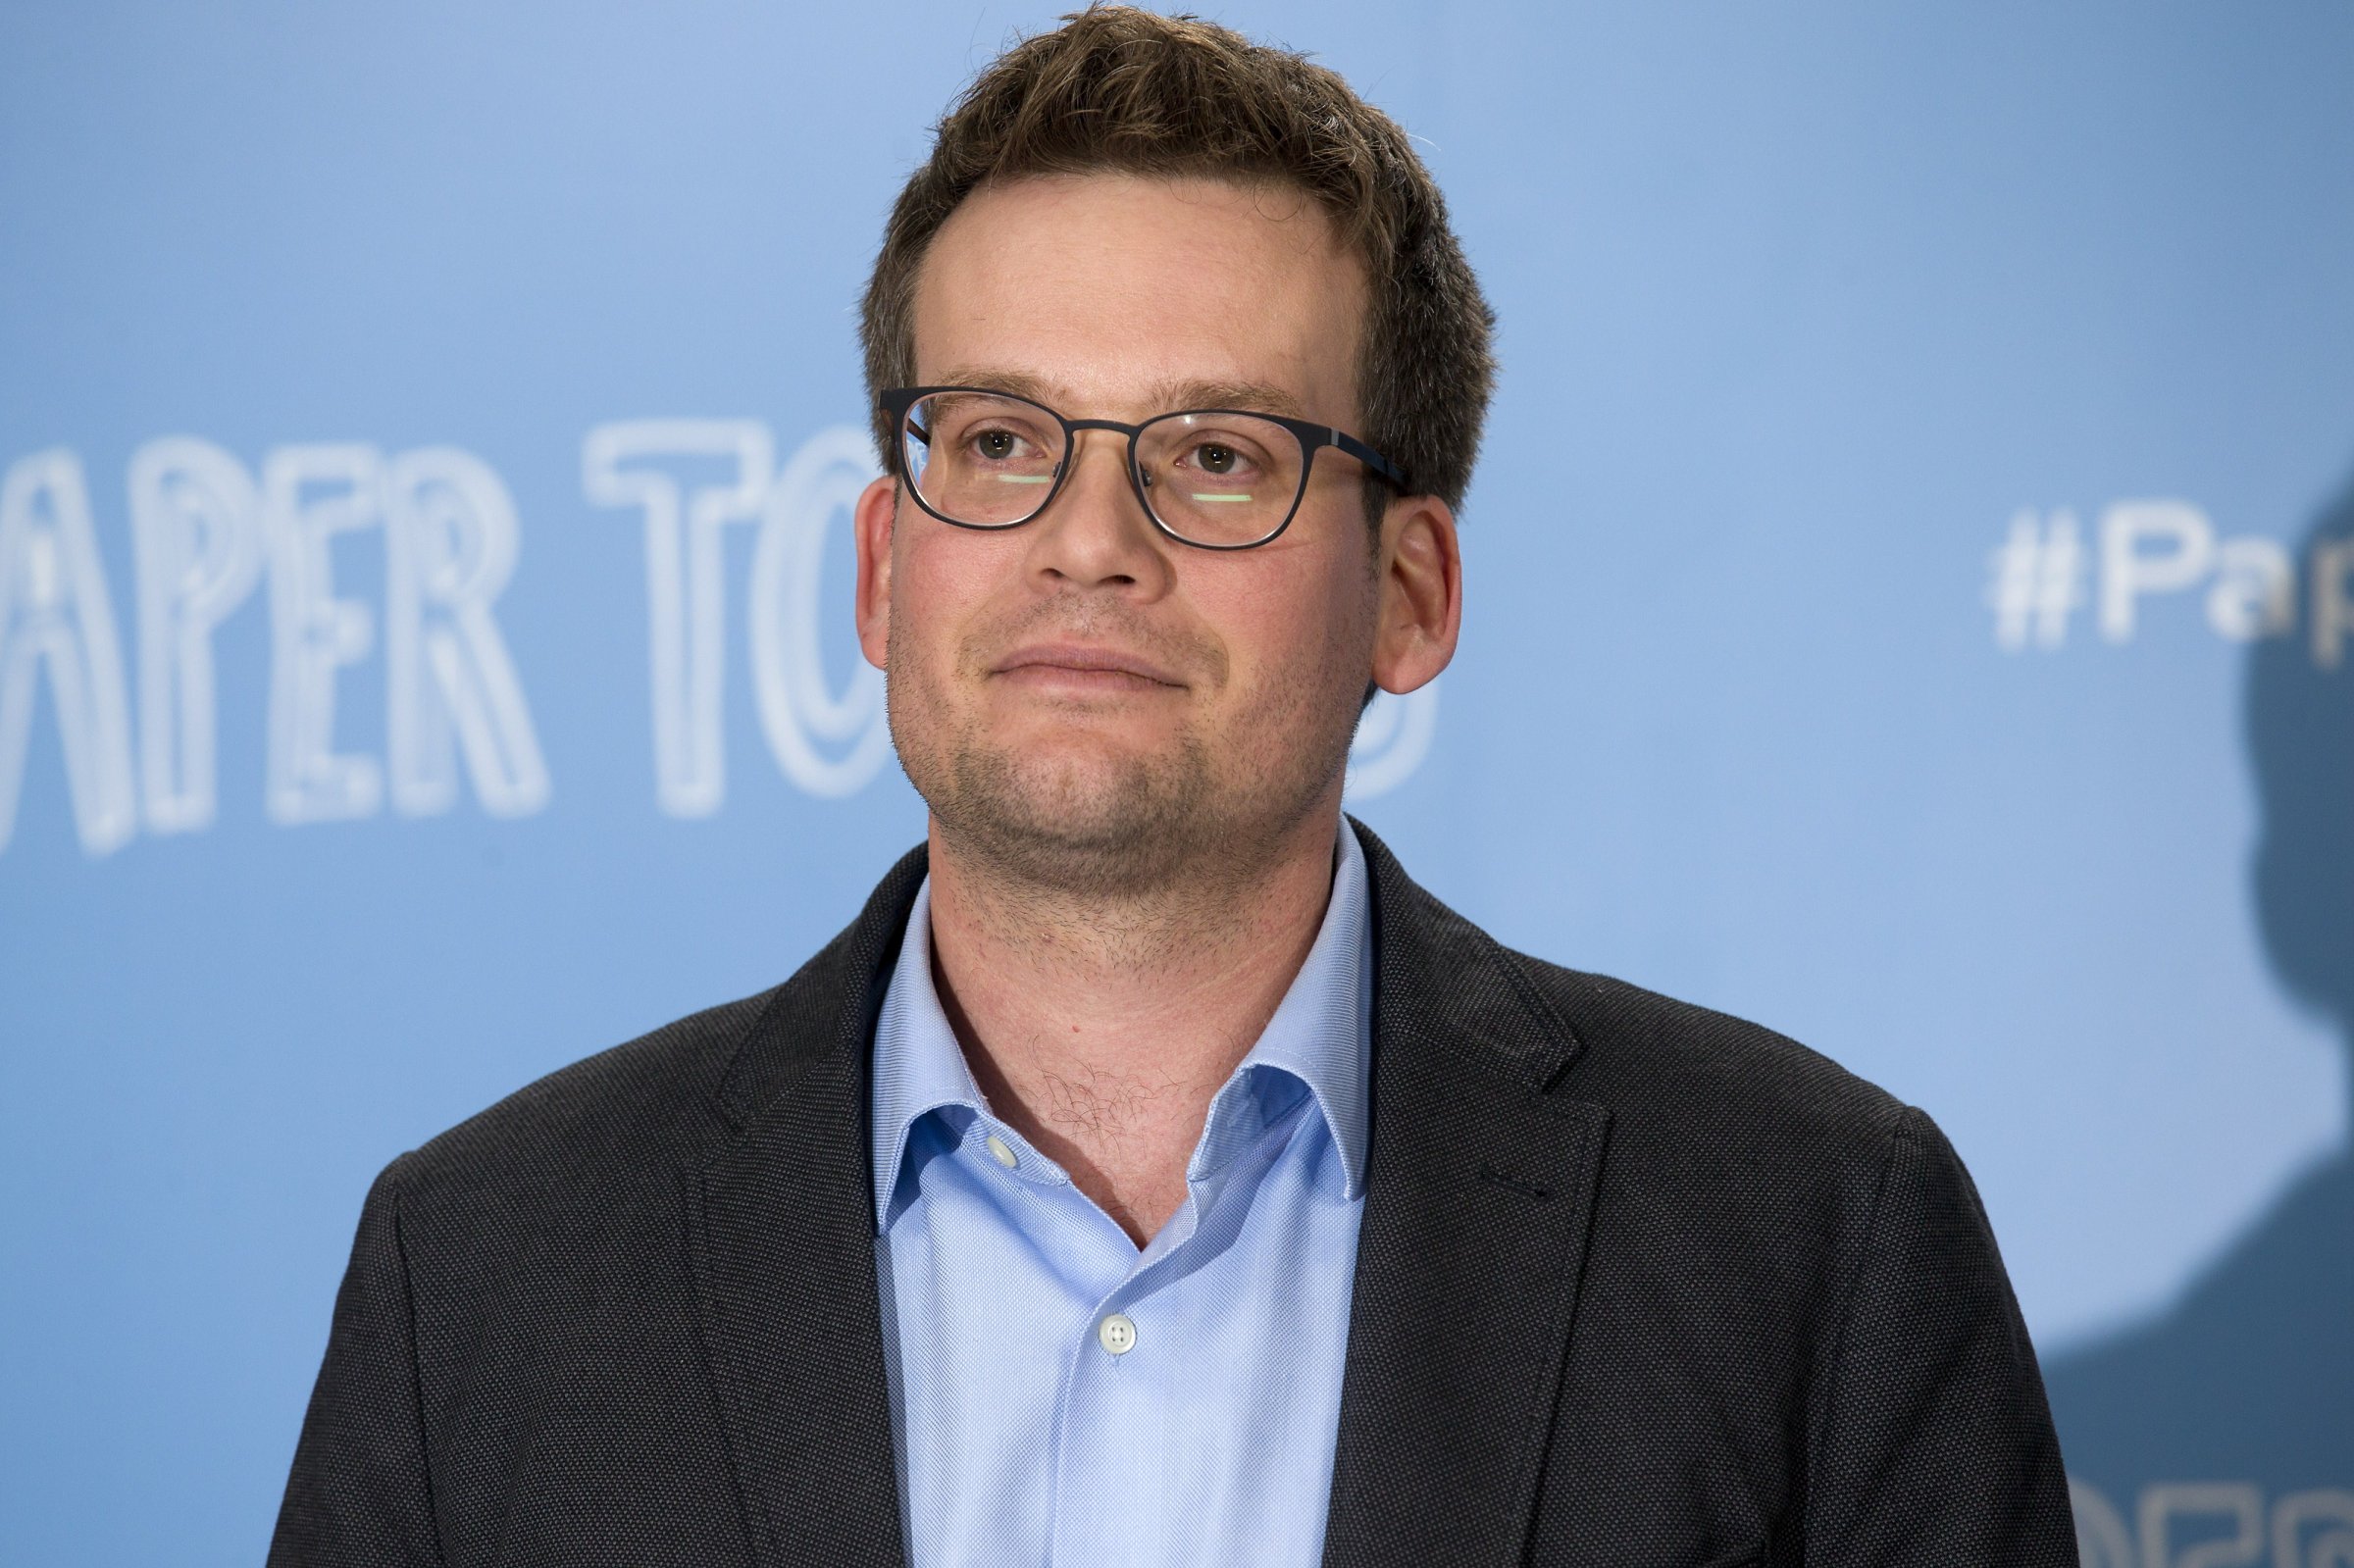 John Green at a photo call for "Paper Towns" in London on June 18, 2015.